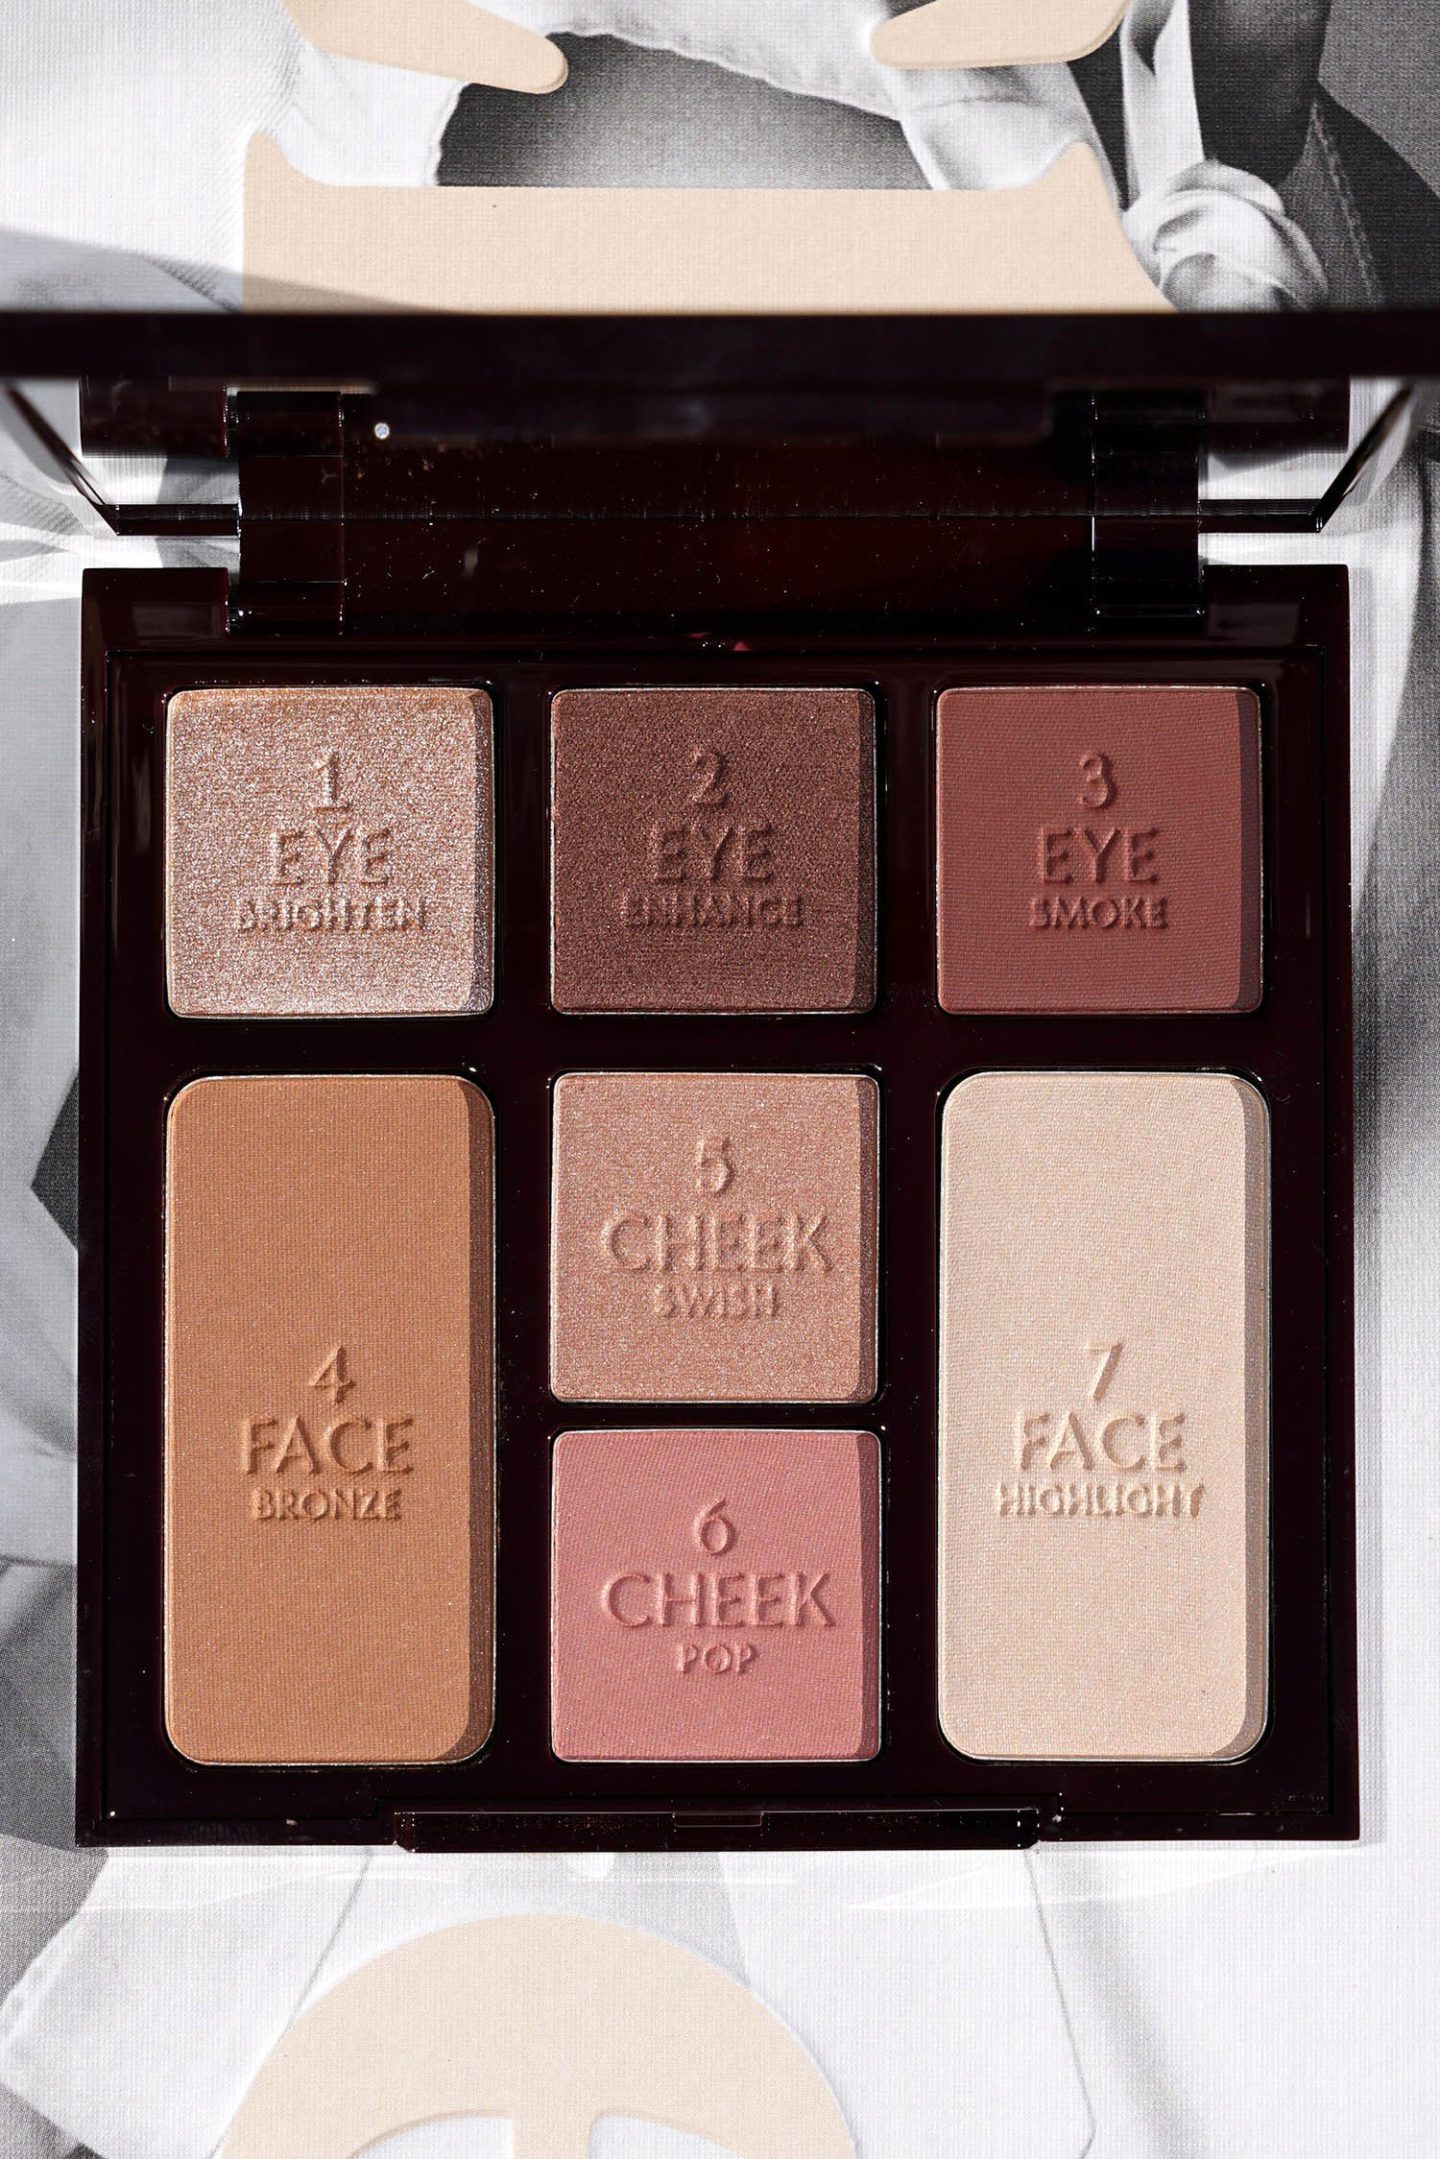 Charlotte Tilbury Gorgeous Glowing Beauty Palette Review